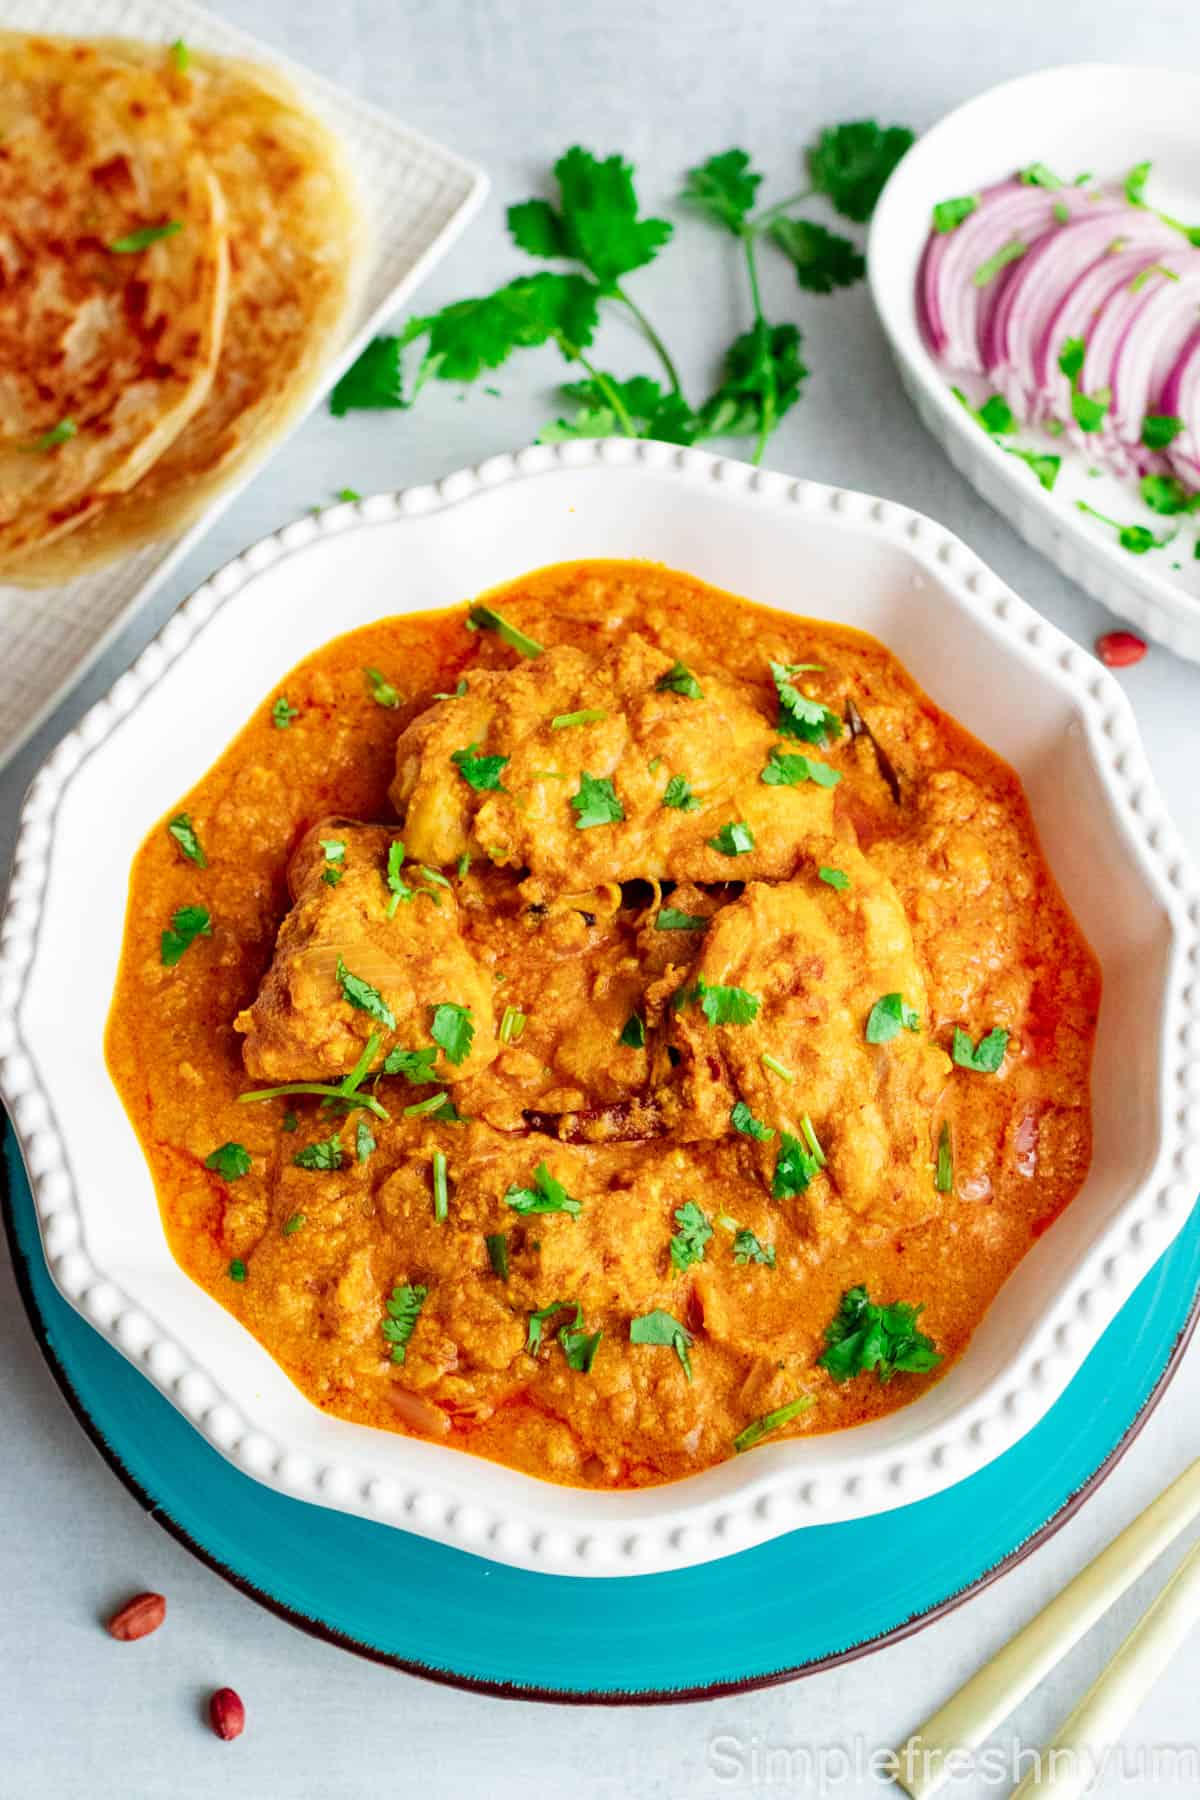 Chicken salan curry served in a white round bowl placed on a bluce plate with cilantro garnished on top. A plate of parotta and another serving dish with sliced onions and lemons are placed on the side.